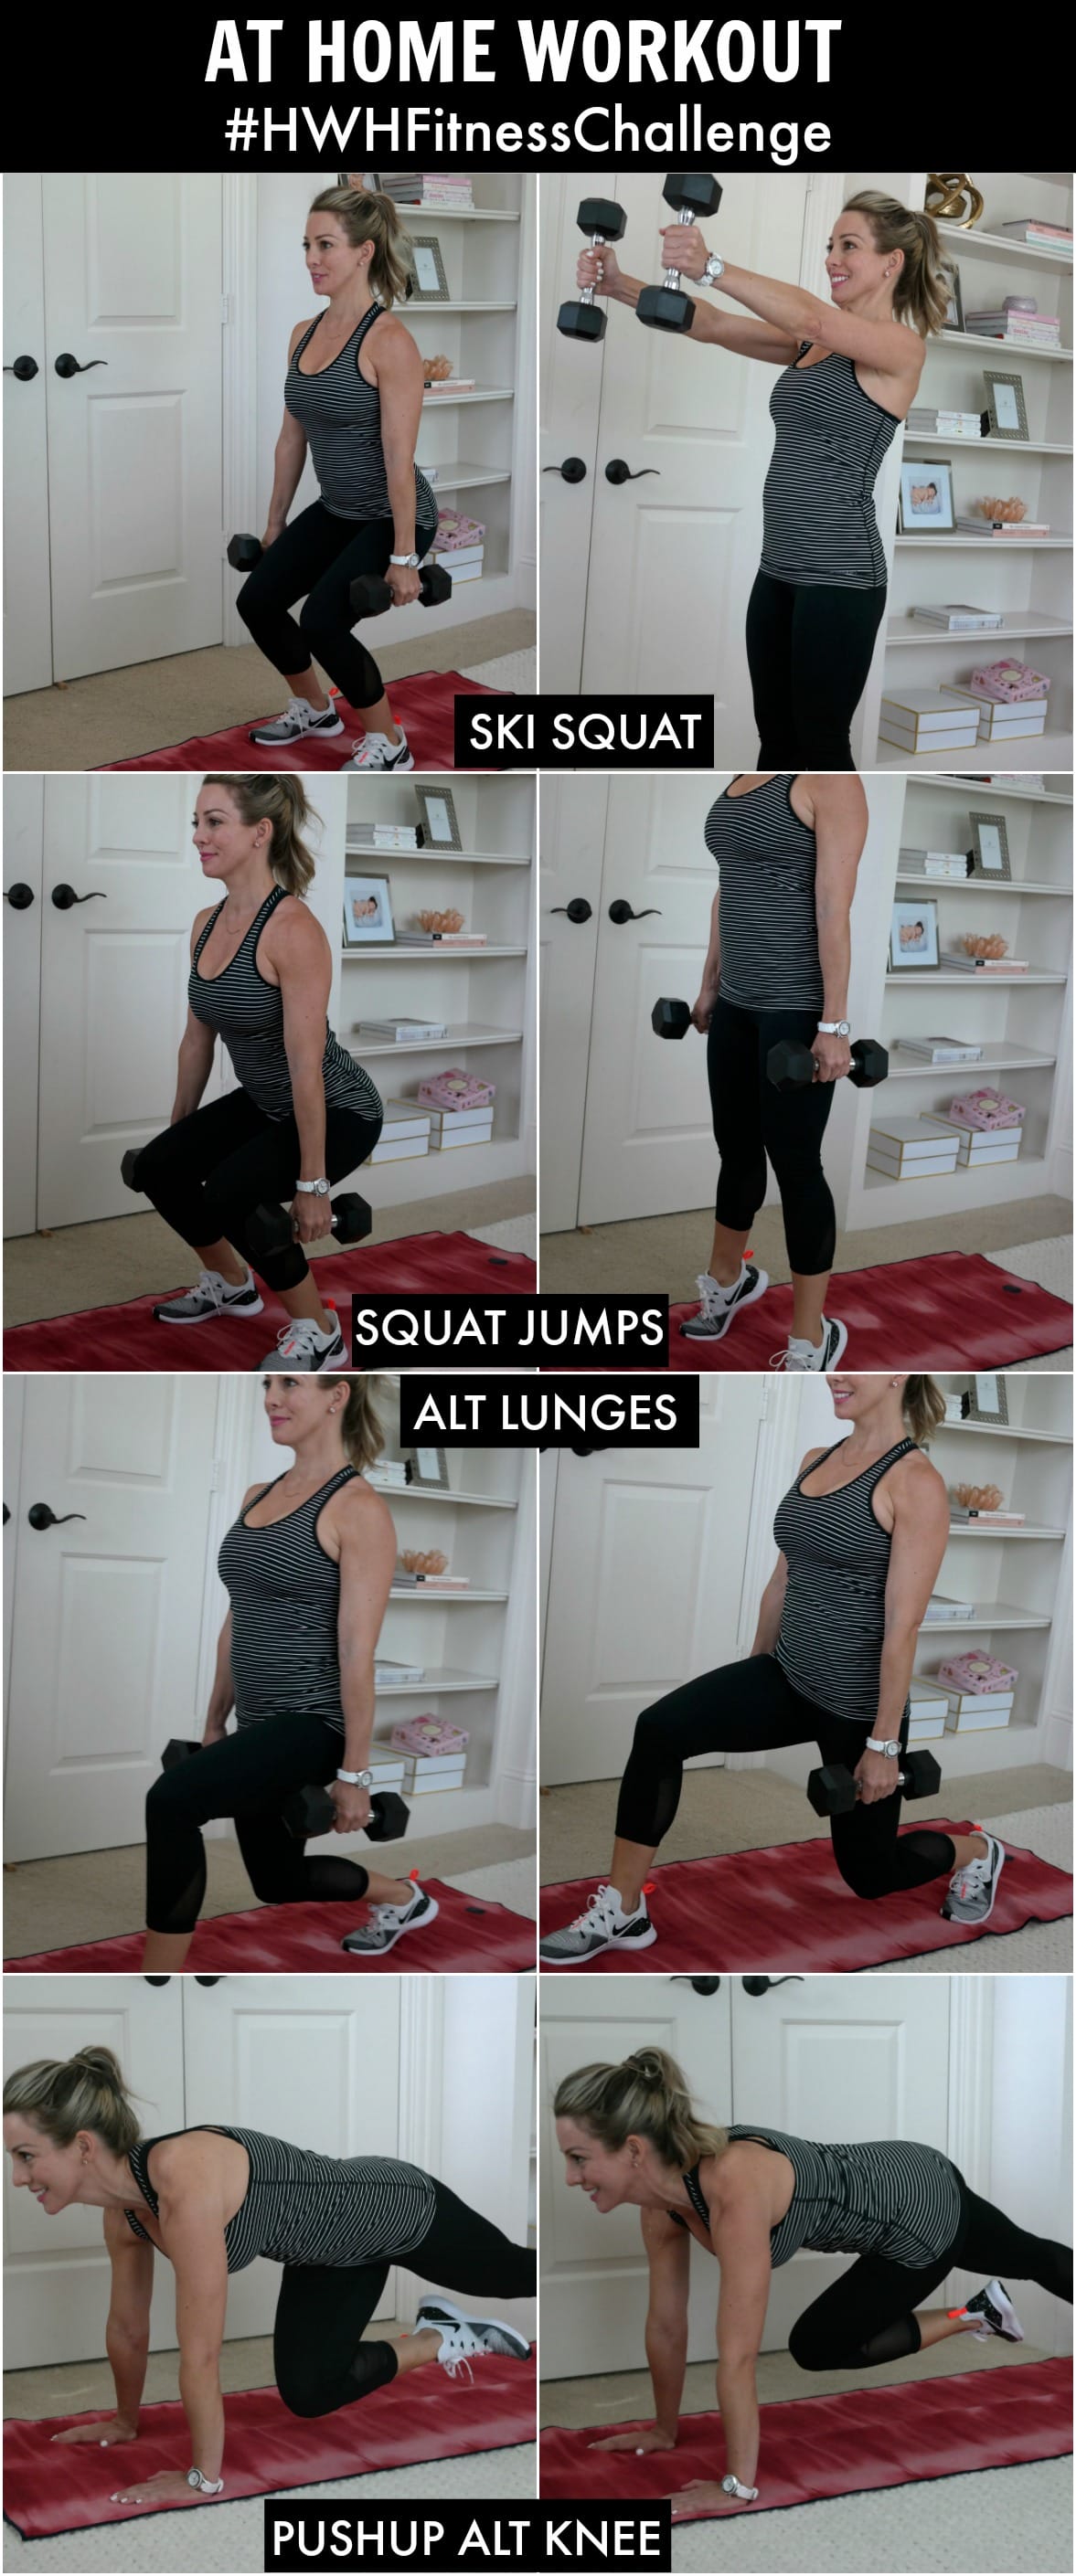 20 minute tabata workout at home